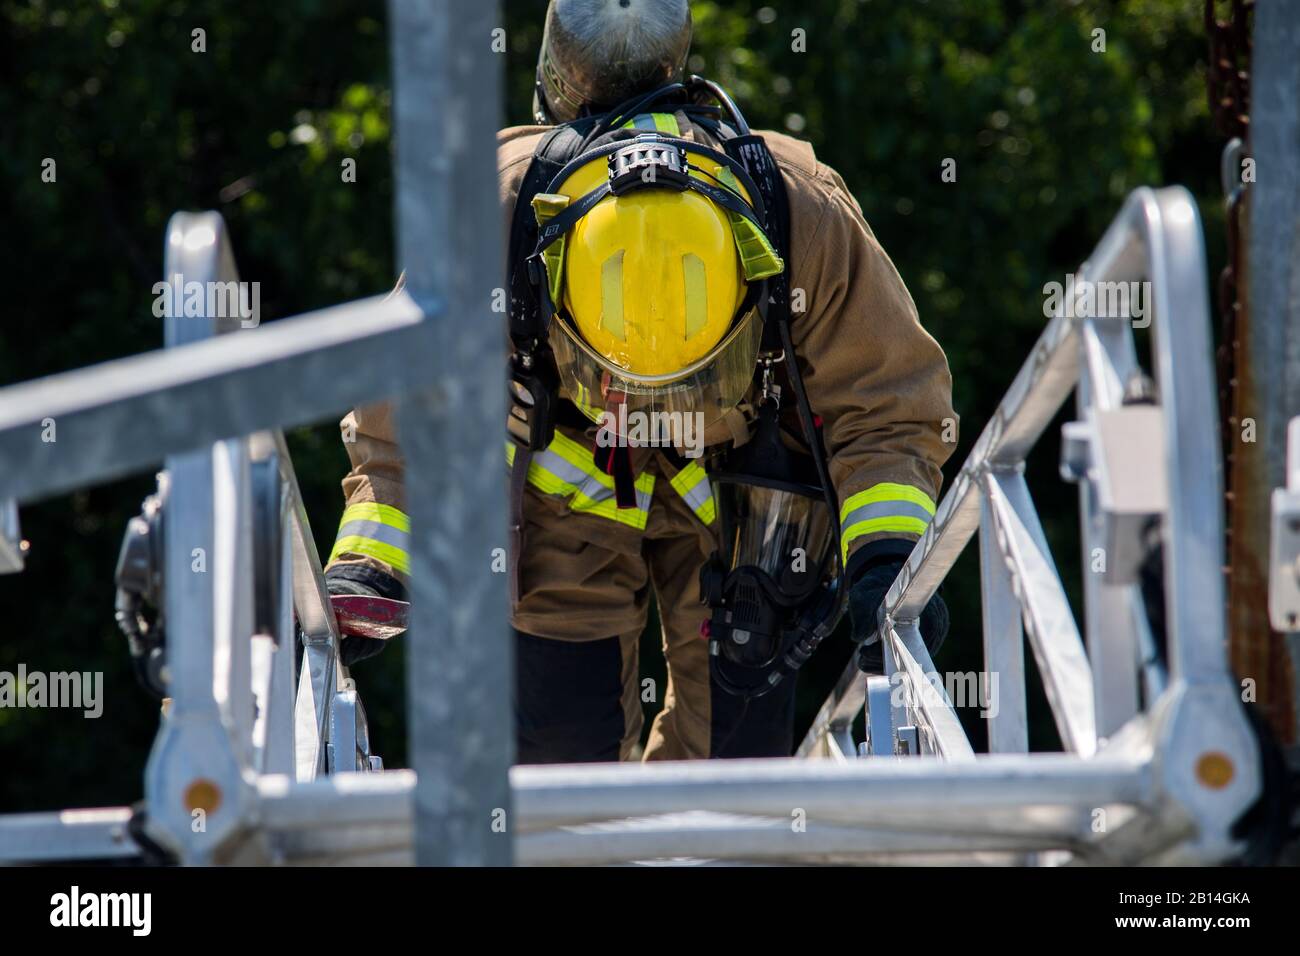 Airman 1st Class Isaiah Lindsay, 2nd Civil Engineer Squadron firefighter, climbs down a ladder during a vertical ventilation training session at Barksdale Air Force Base, La., June 3, 2019. Training with Personal Protective Equipment allows Airmen to be familiar with their gear before ever having to use it in a real world scenario. (U.S. Air Force photo by Senior Airman Tessa B. Corrick) Stock Photo